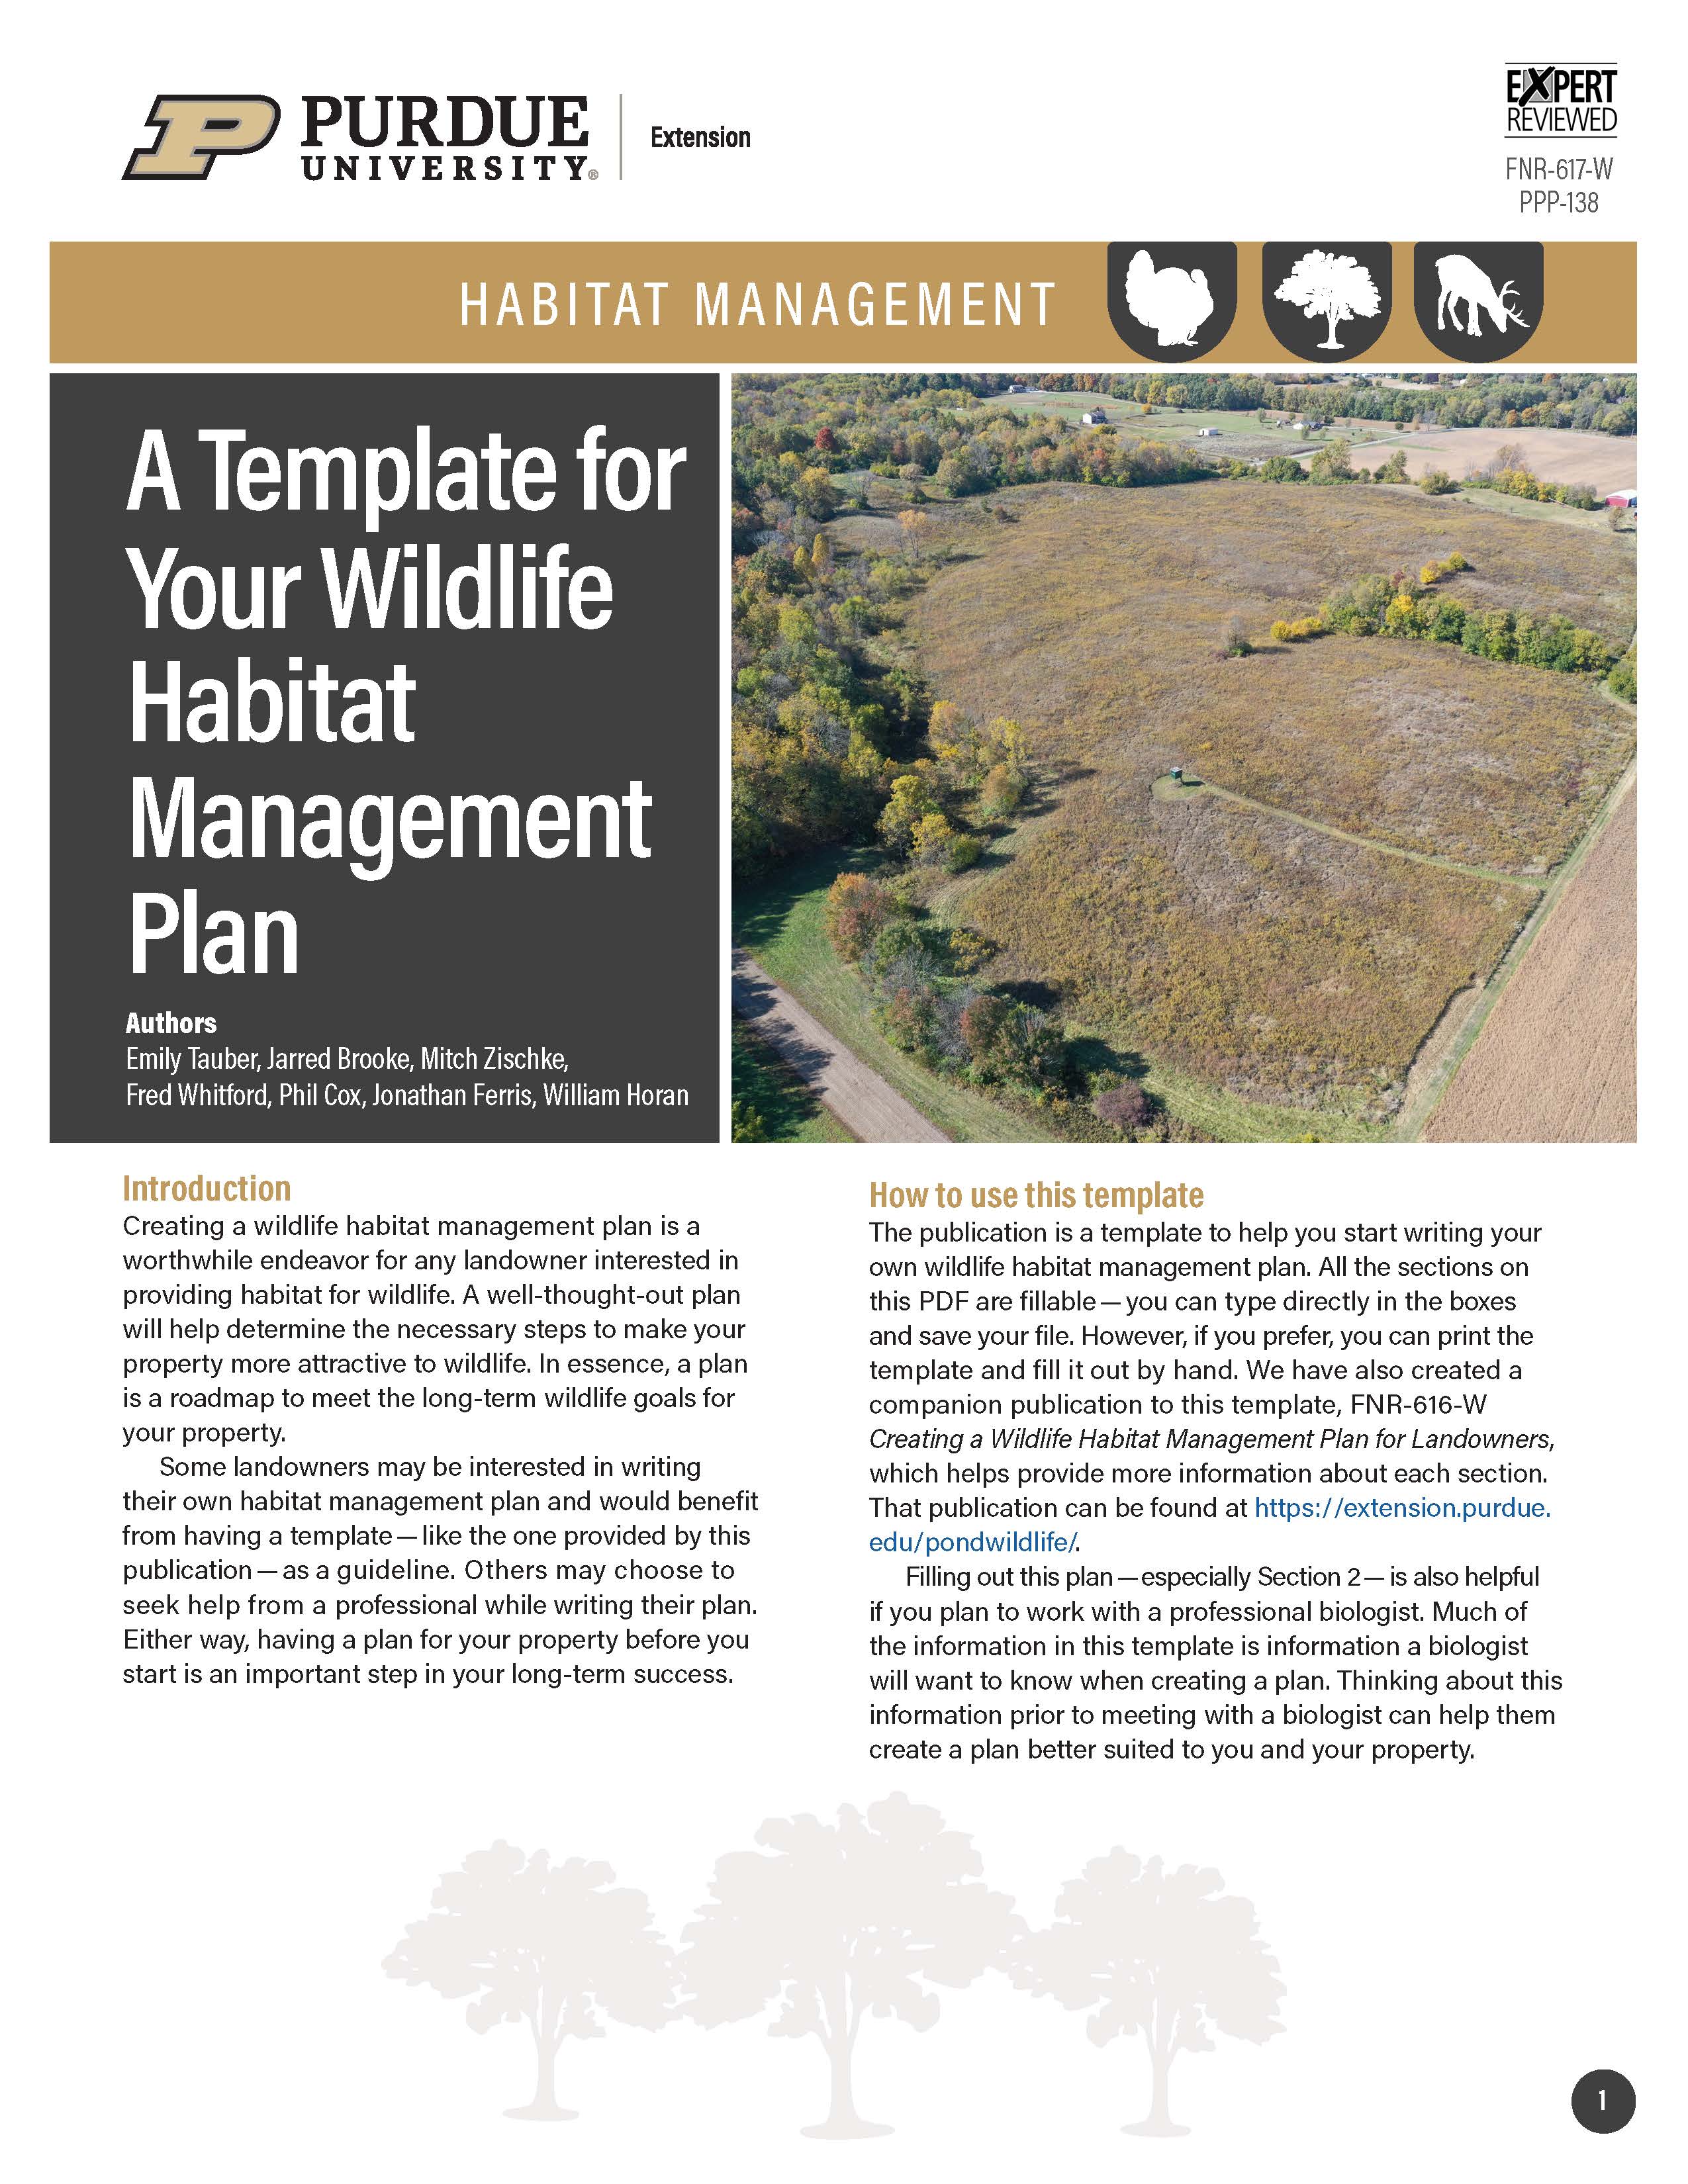 A Template for Your Wildlife Habitat Management Plan 